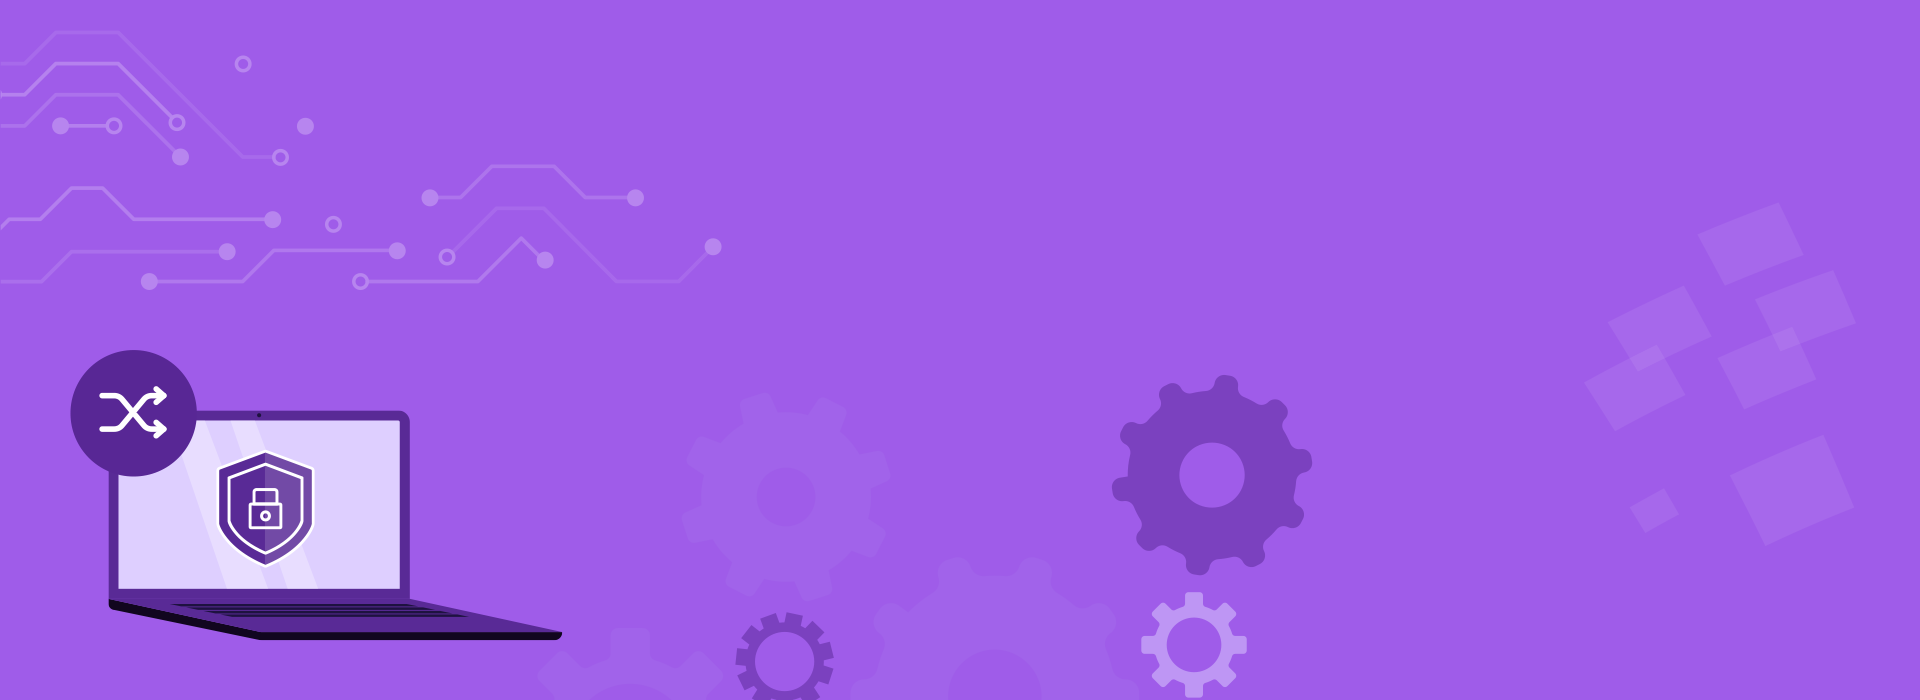 illustration of laptop, gears, and technology on a purple background